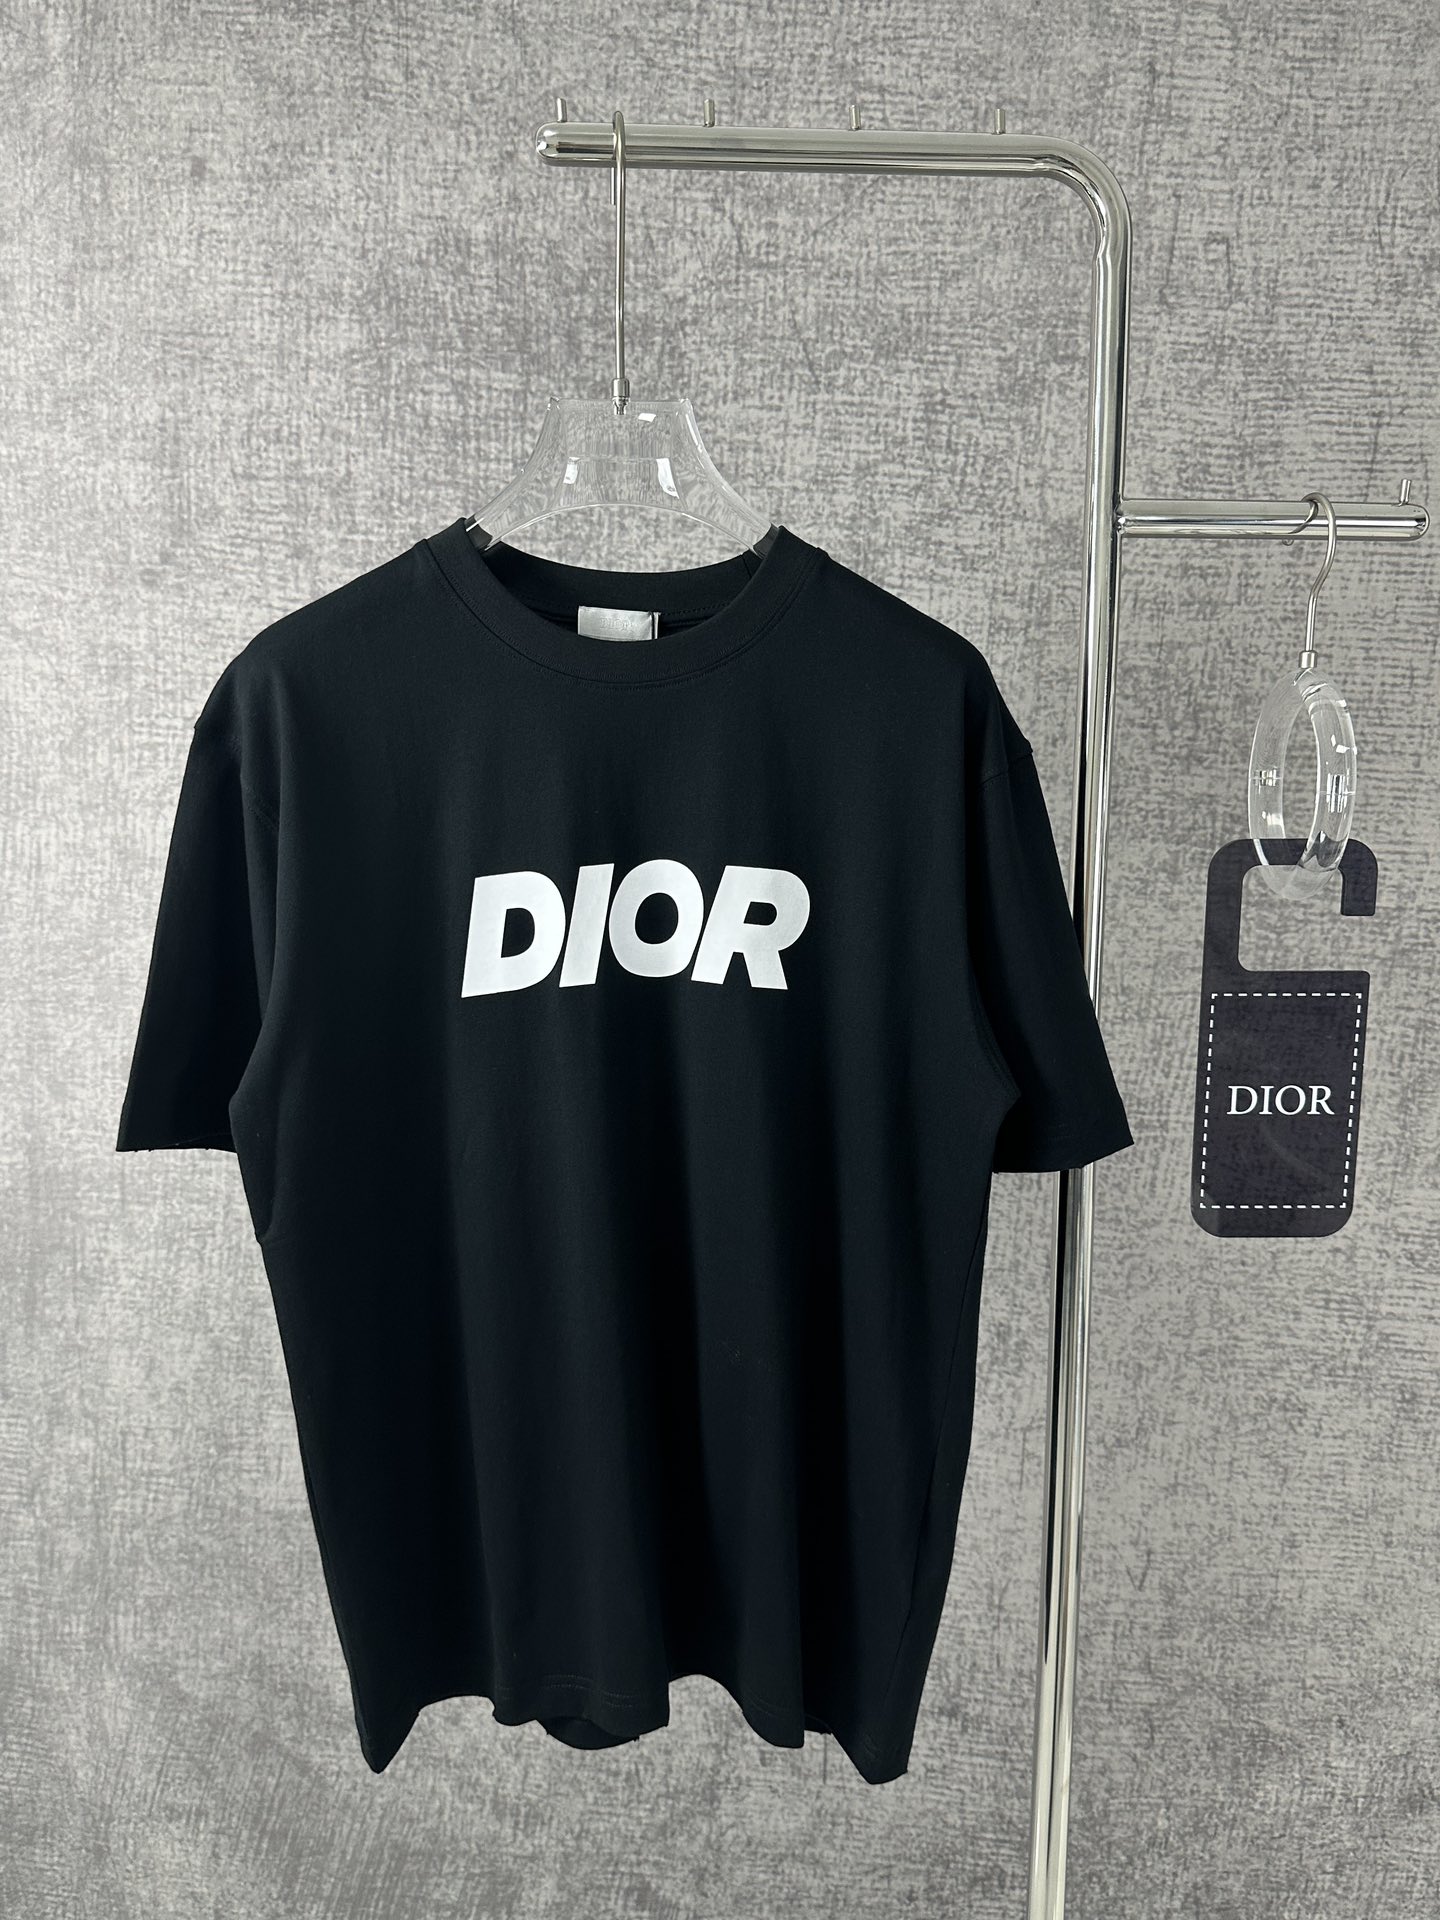 Dior Clothing T-Shirt Black Blue Printing Unisex Cotton Knitting Summer Collection Short Sleeve